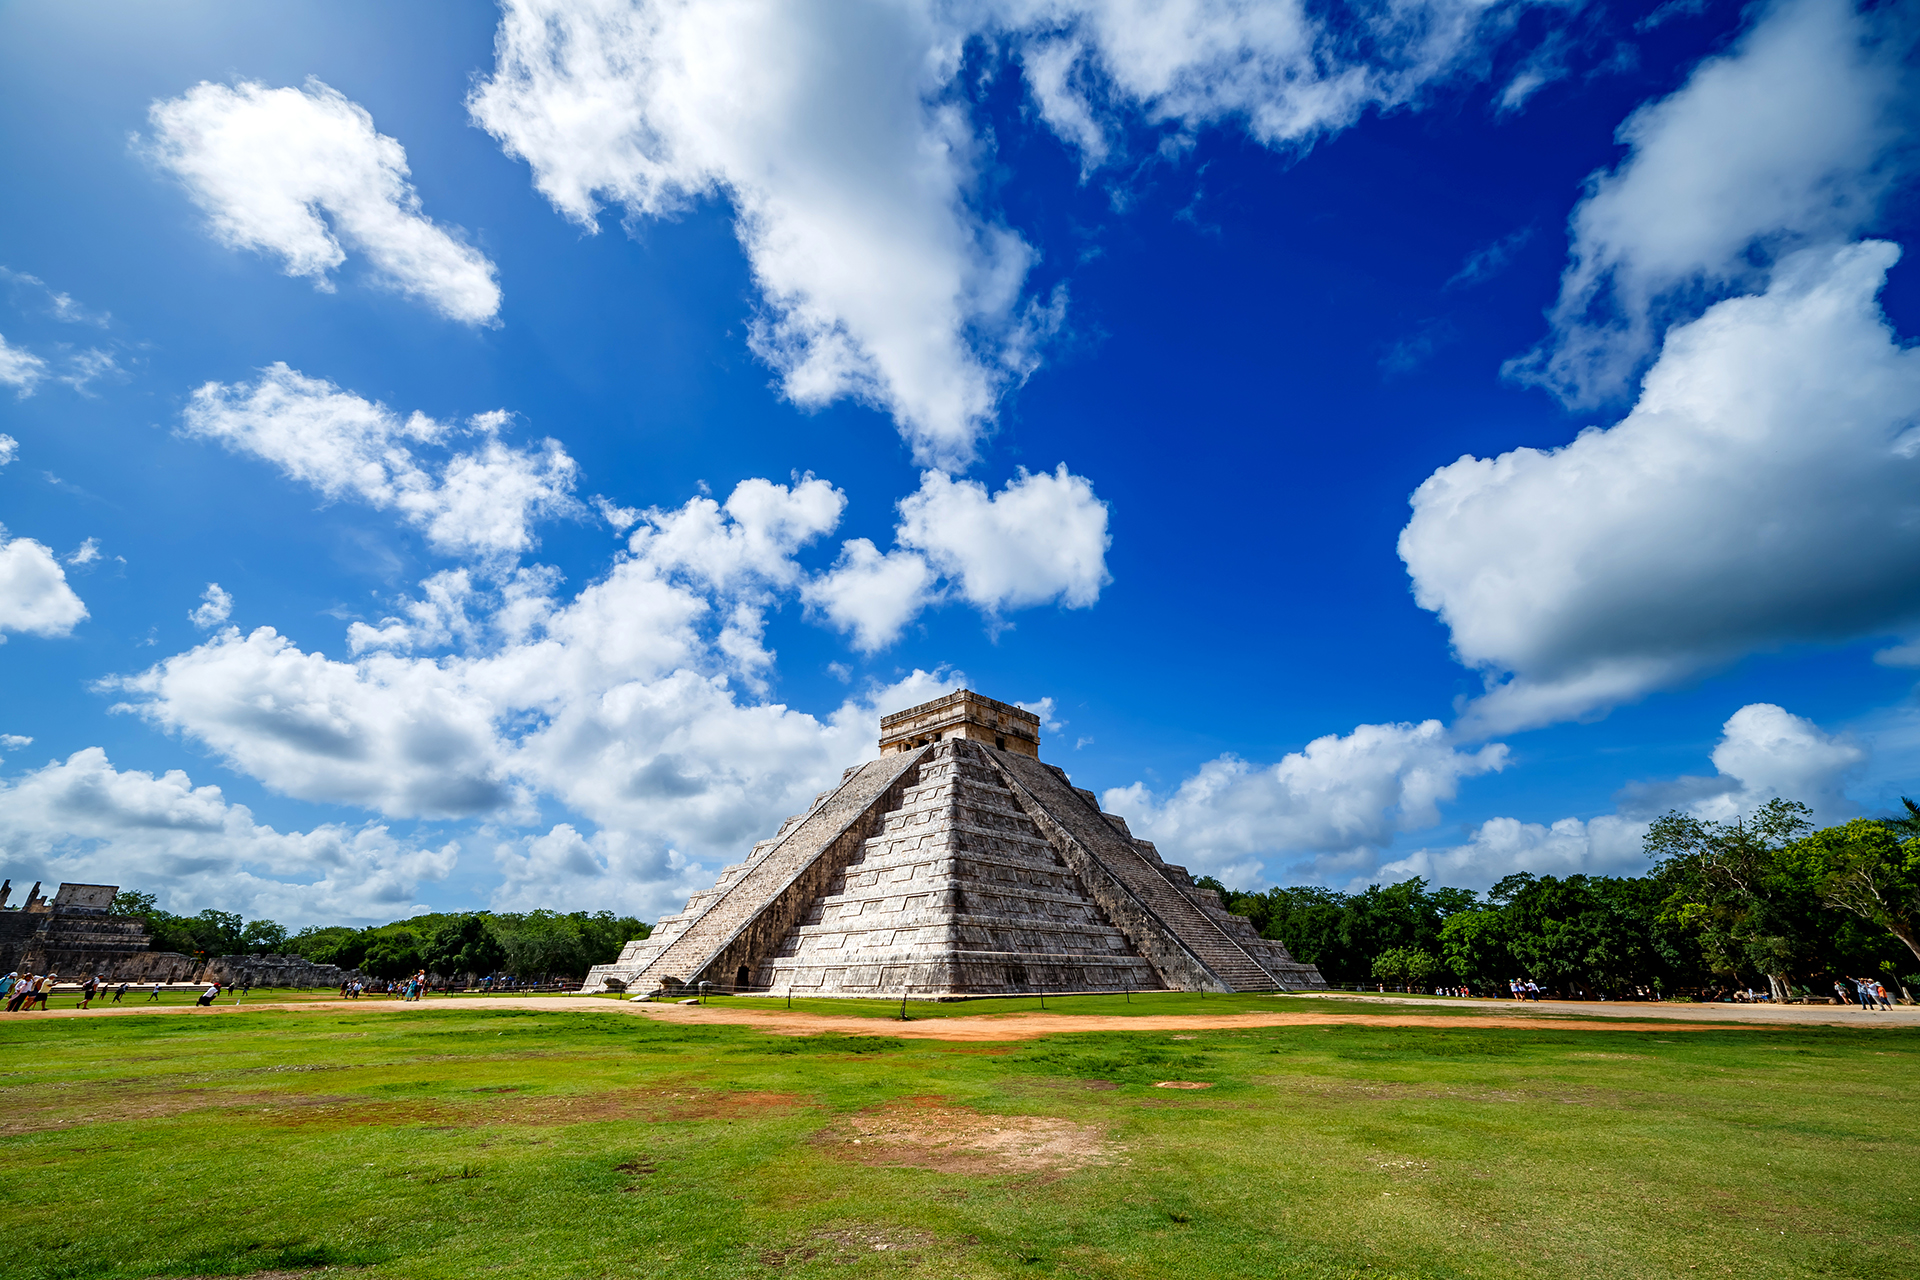 A breathtaking view of the pyramid in the archaeological site of Chichen Itza in Yucatan, Mexico